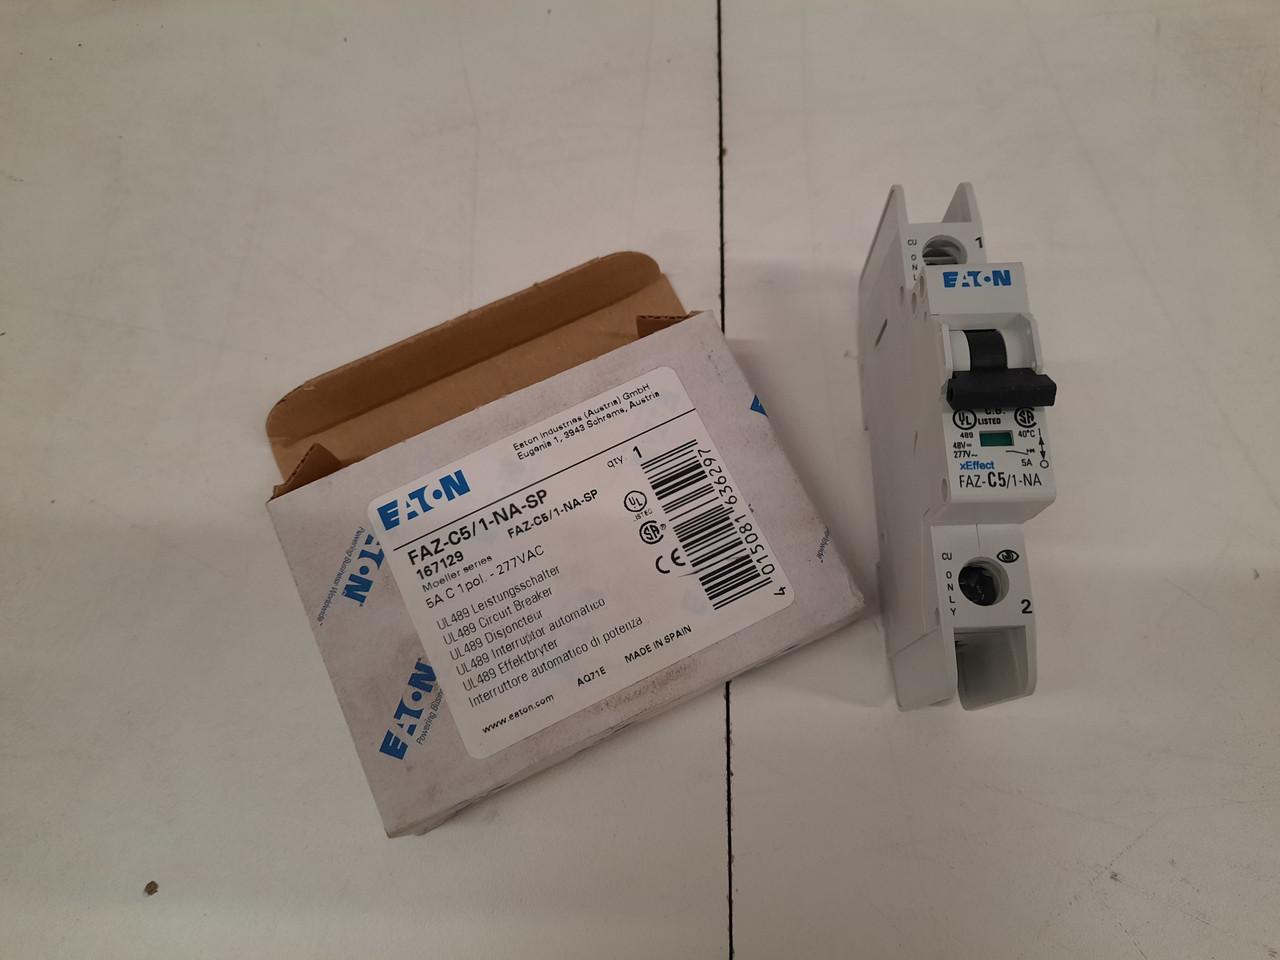 Eaton FAZ-C5/1-NA-SP Eaton FAZ branch protector,UL 489 Industrial miniature circuit breaker - supplementary protector,Single package,Medium levels of inrush current are expected,5 A,10 kAIC,Single-pole,277 V,5-10X /n,Q38,50-60 Hz,Screw terminals,C Curve